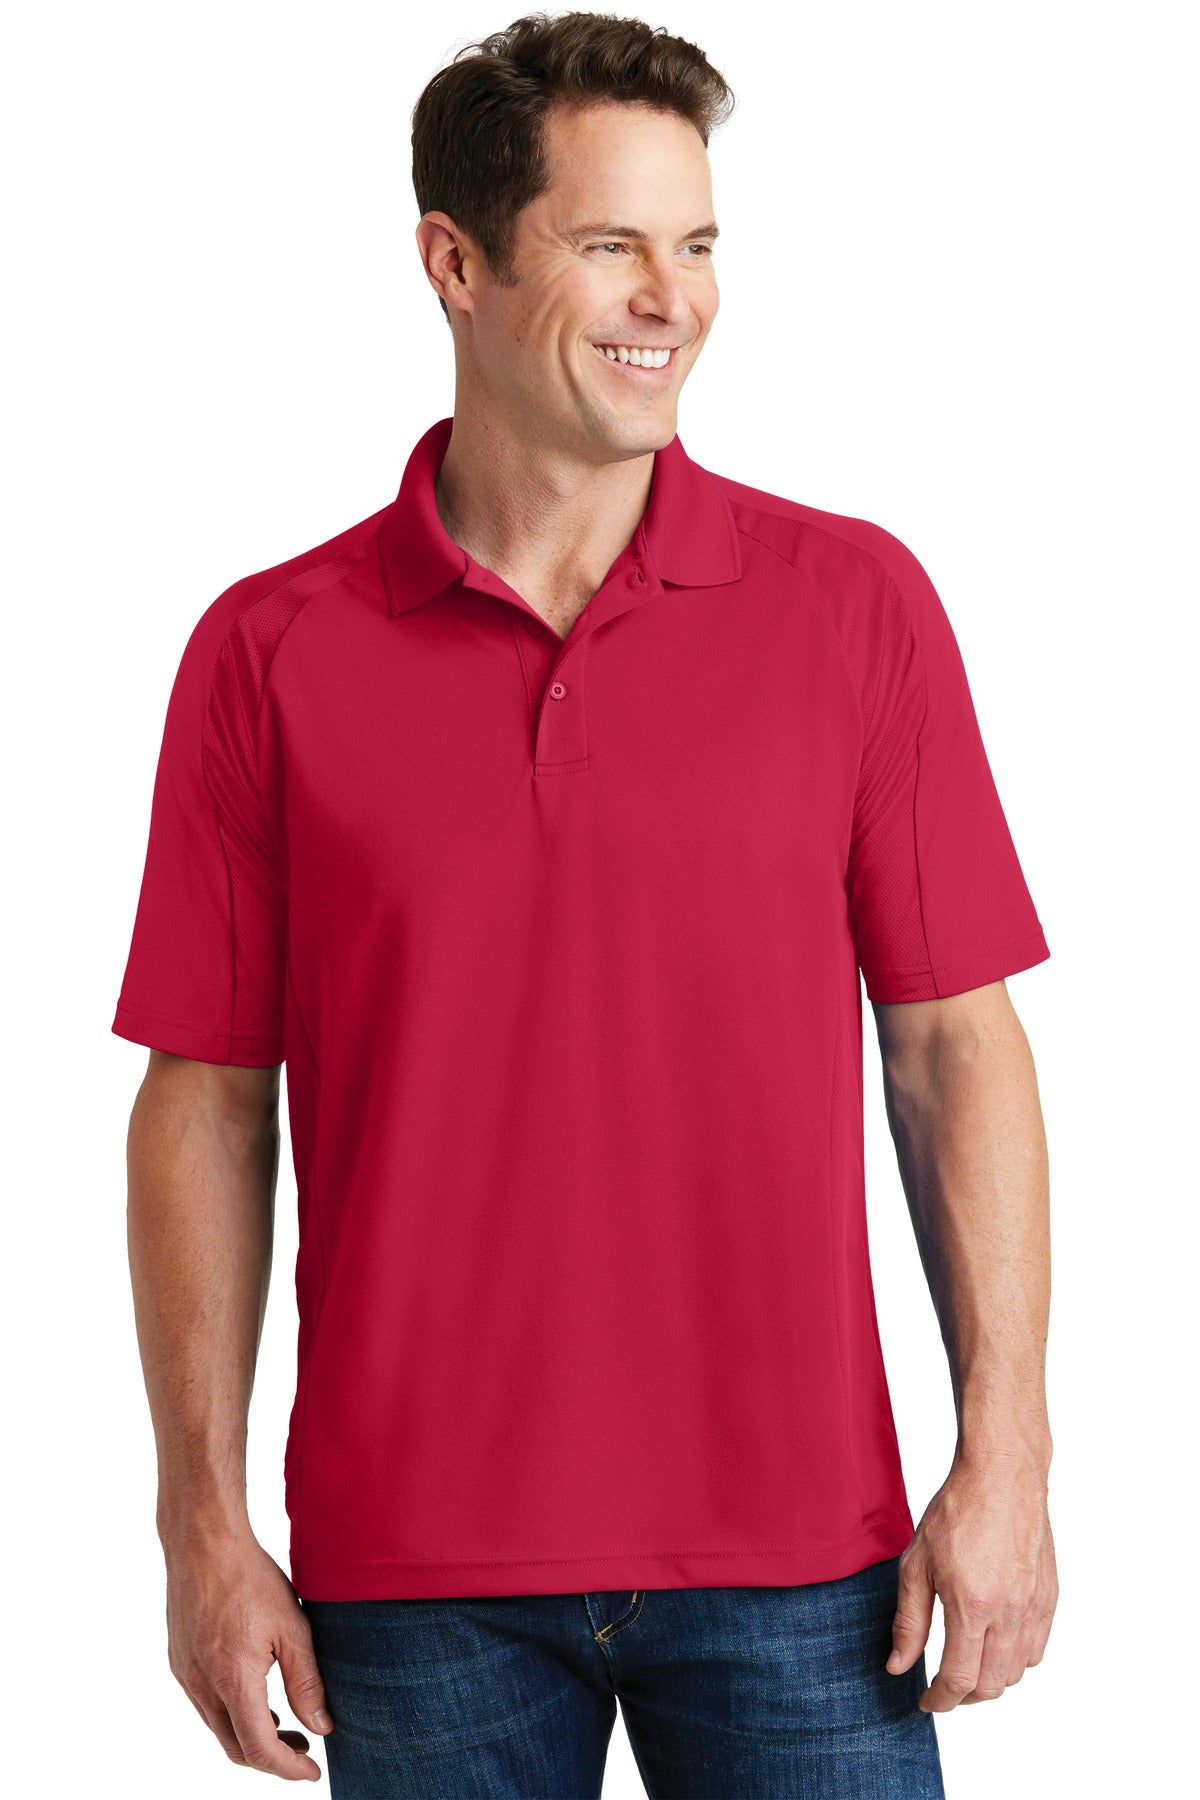 Photo of Sport-Tek Polos/Knits T474  color  Engine Red